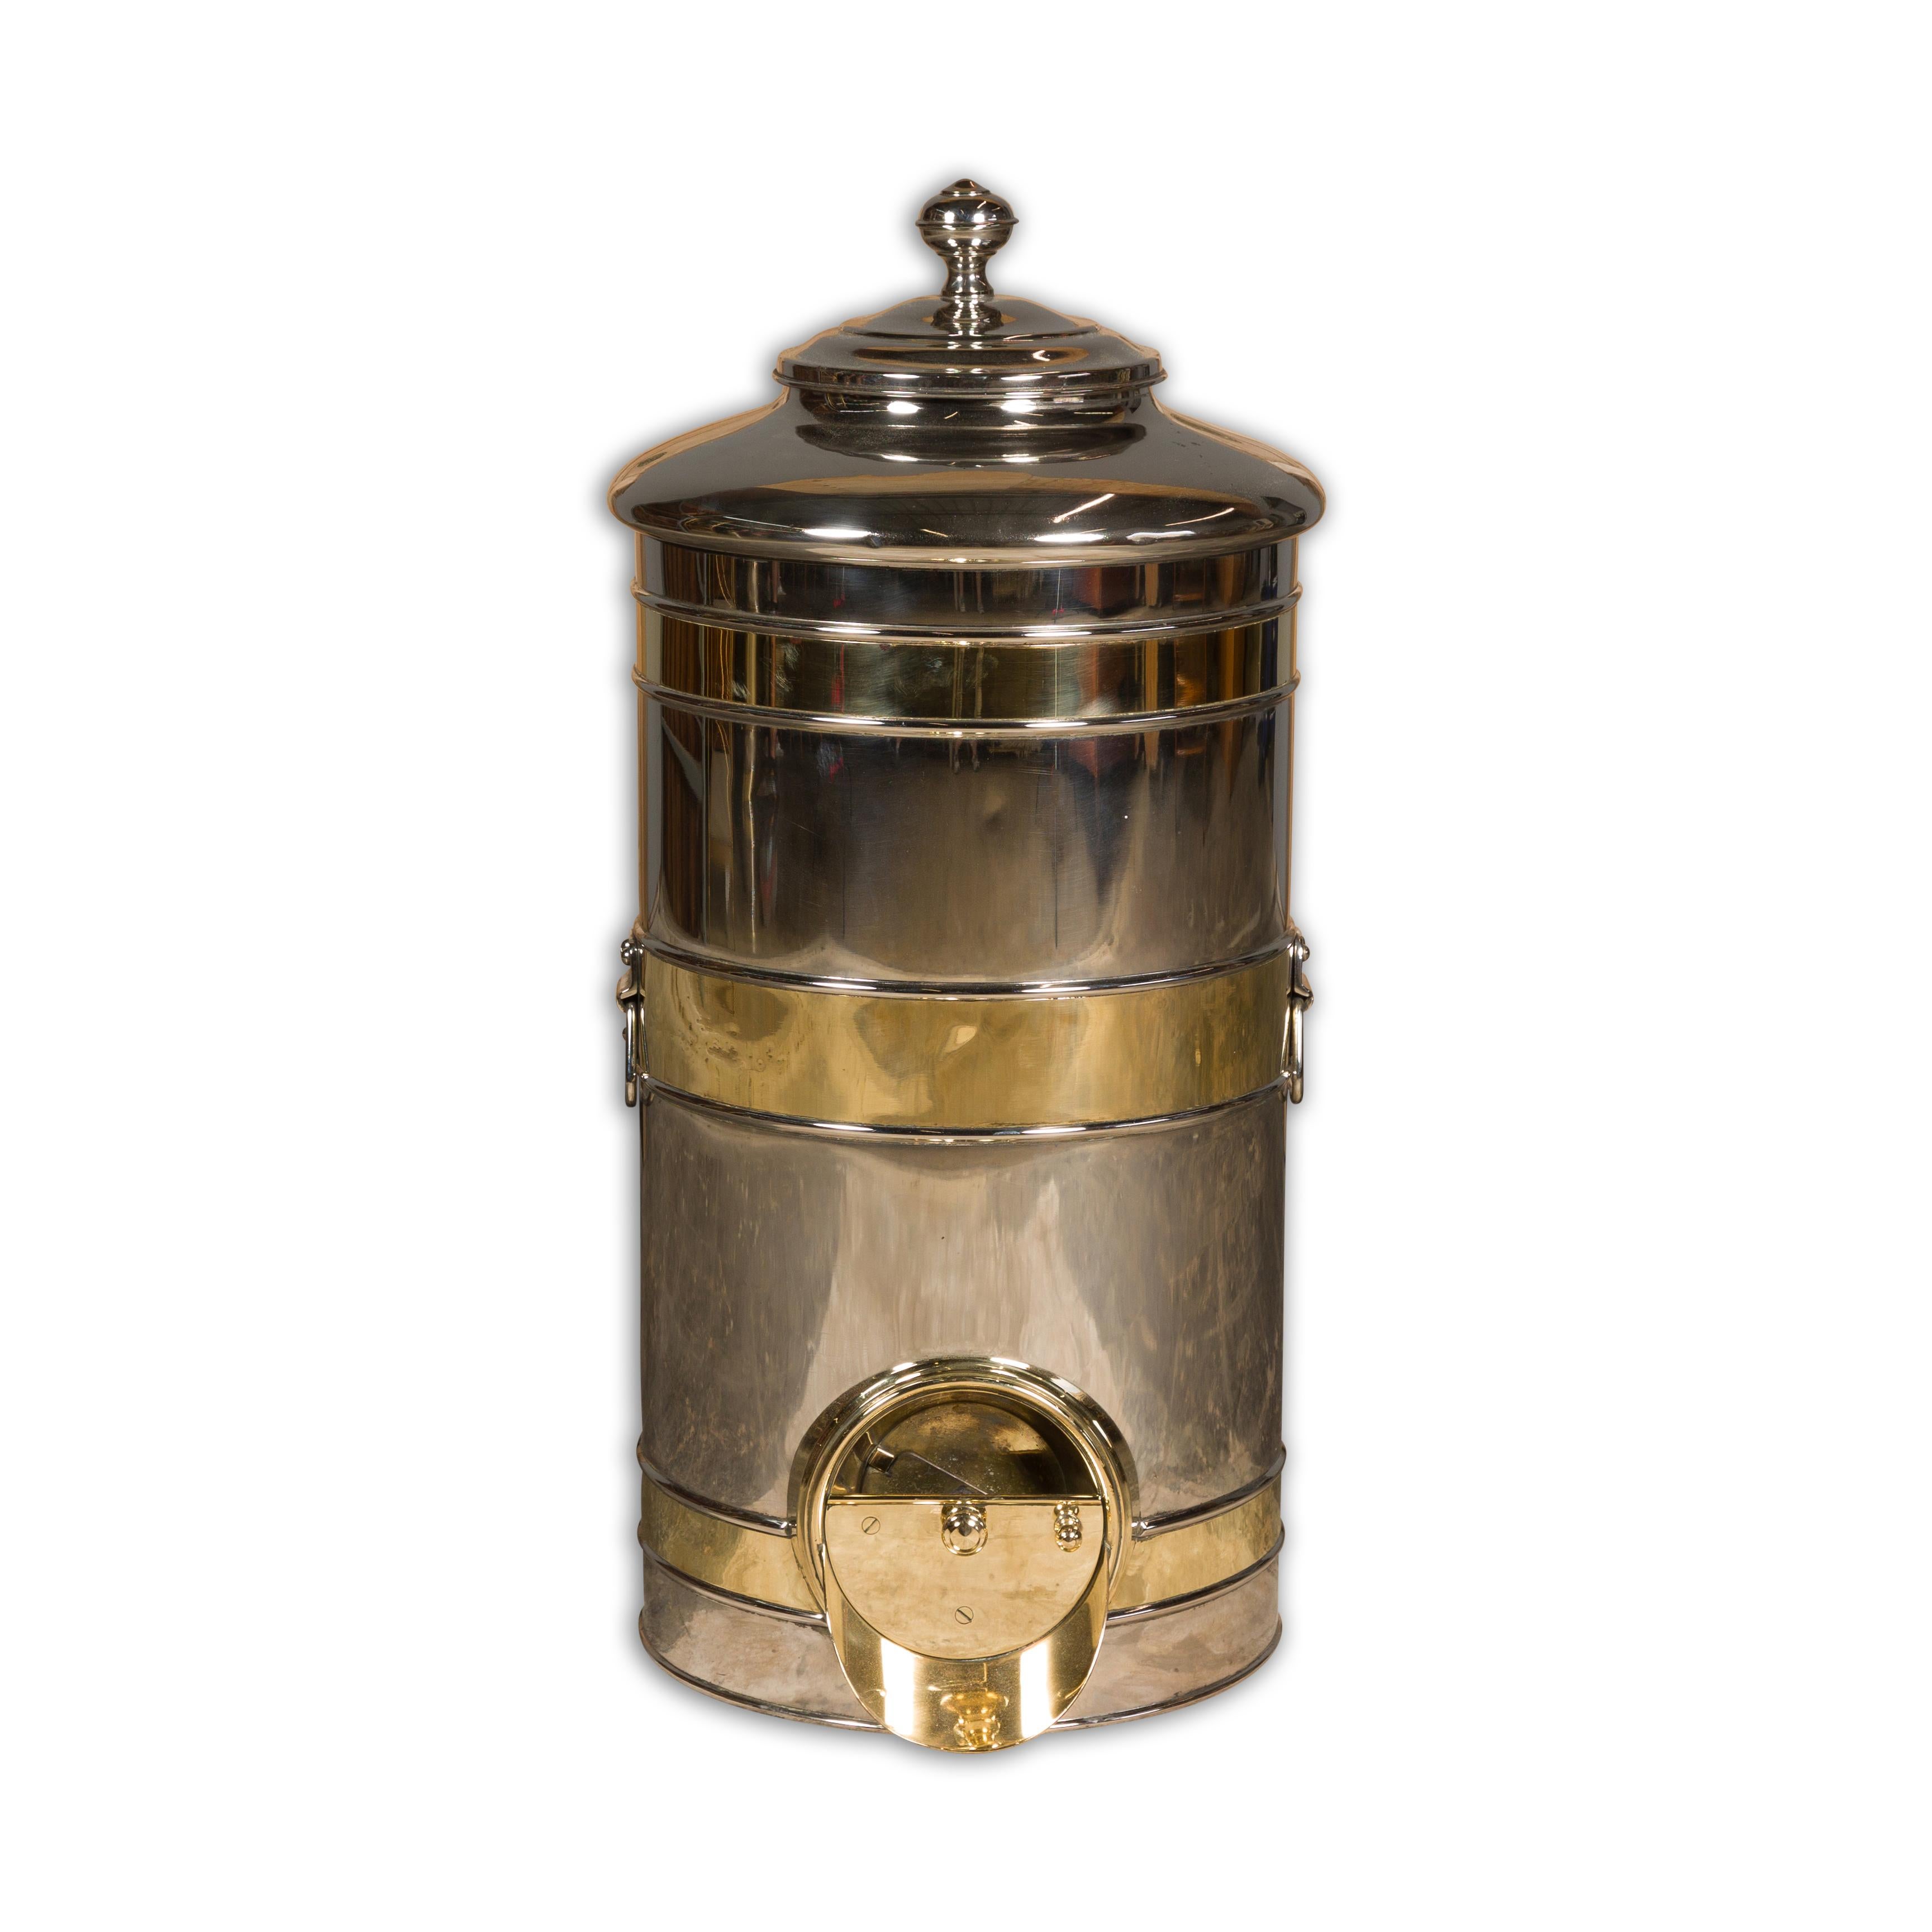 A French Turn of the Century steel and brass coffee bean dispenser from circa 1900.  This French Turn of the Century coffee bean dispenser, crafted from steel and brass, is a captivating blend of vintage charm and functional elegance. Dating back to